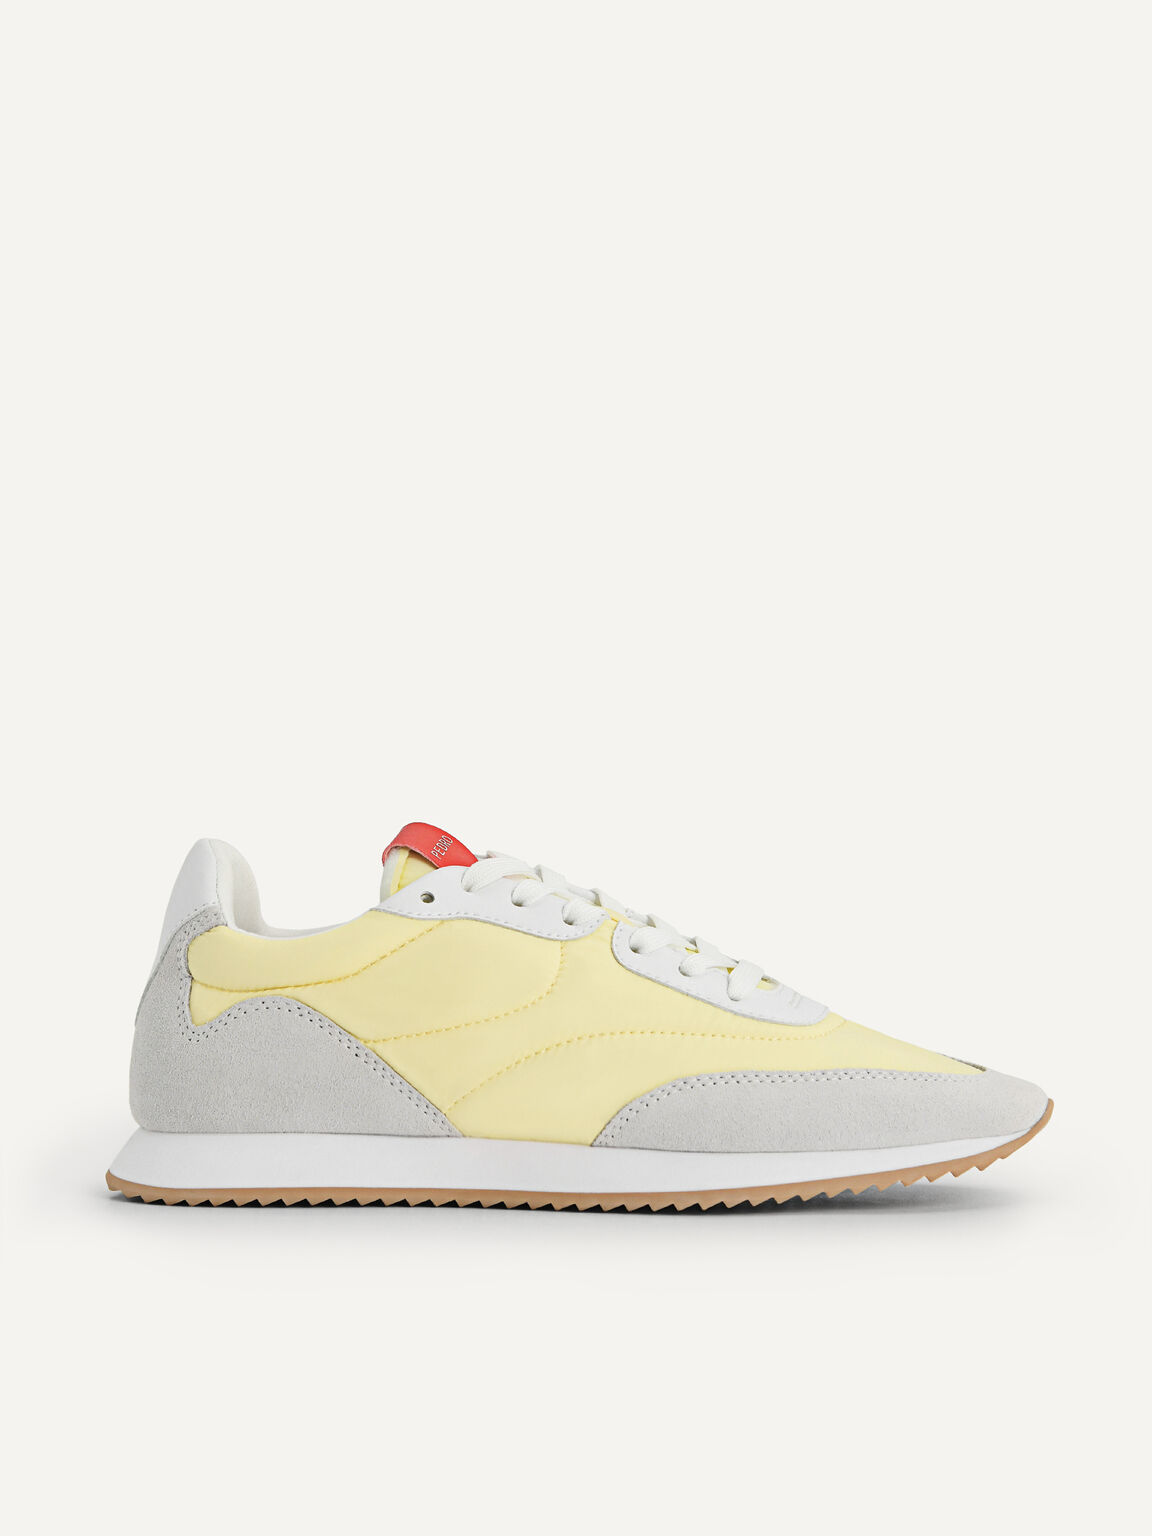 Nylon Leather Casual Sneakers, Light Yellow